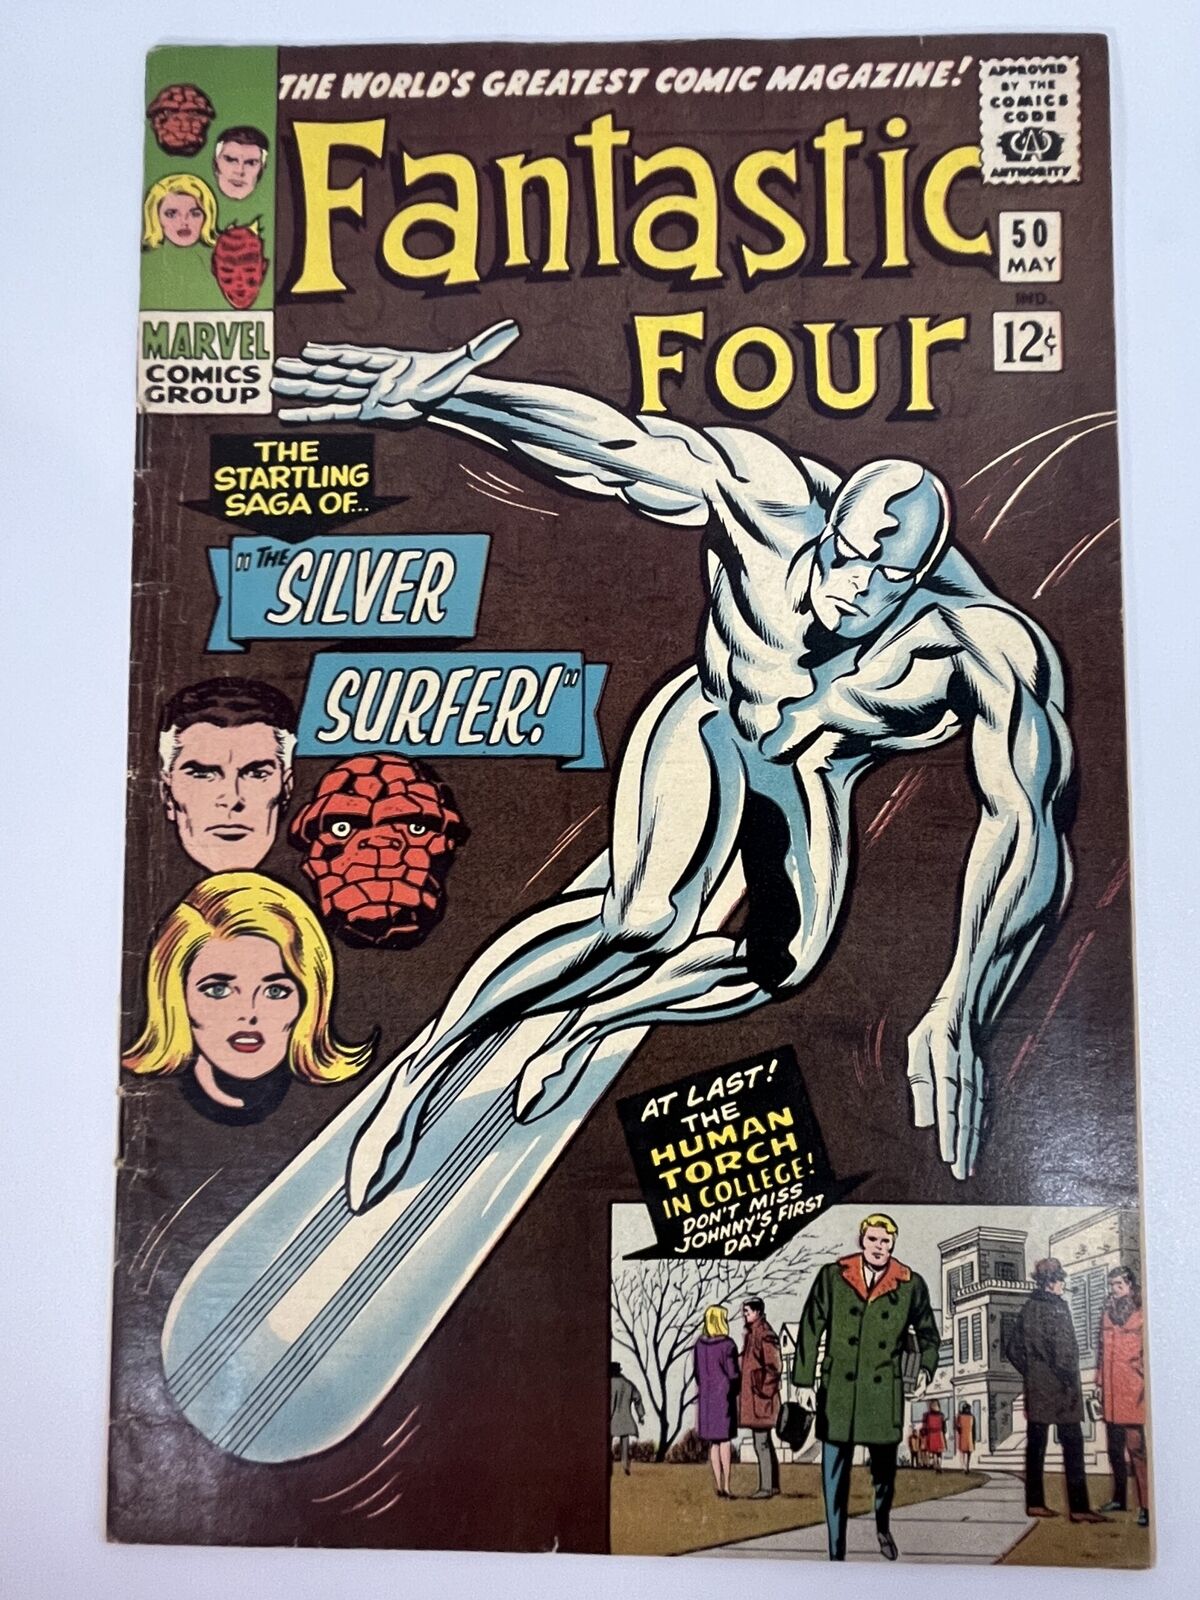 Fantastic Four #50 (1966) Silver Surfer cover app. in 4.5 Very Good+